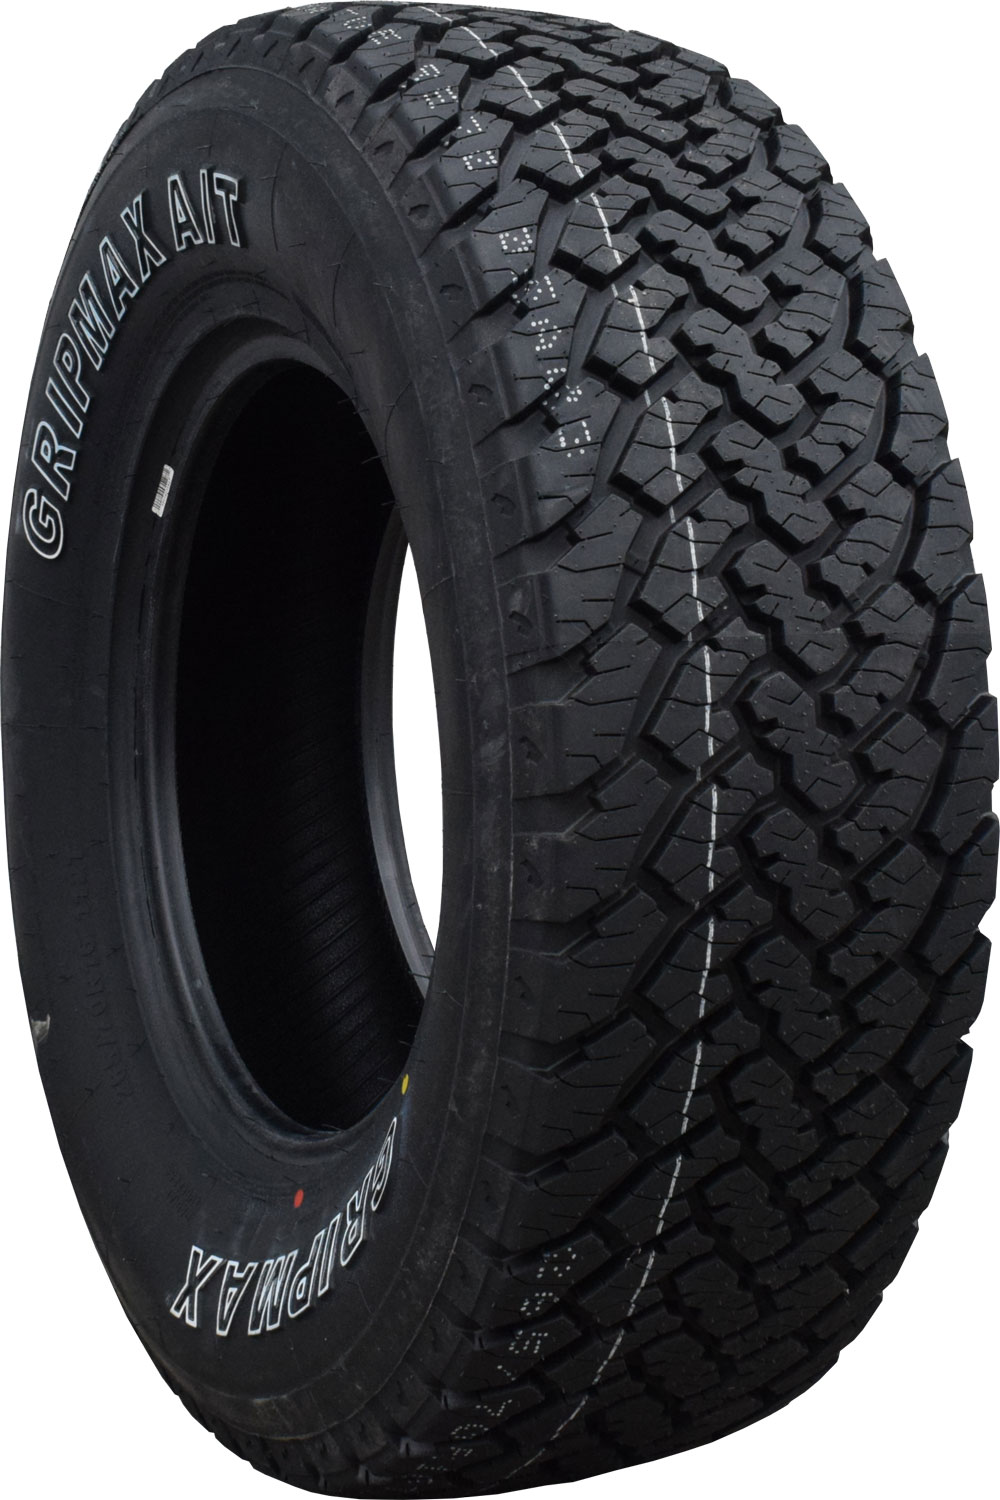 Anvelope jeep GRIPMAX INCEPTION AT 3PMSF RWL XL 245/70 R16 111T